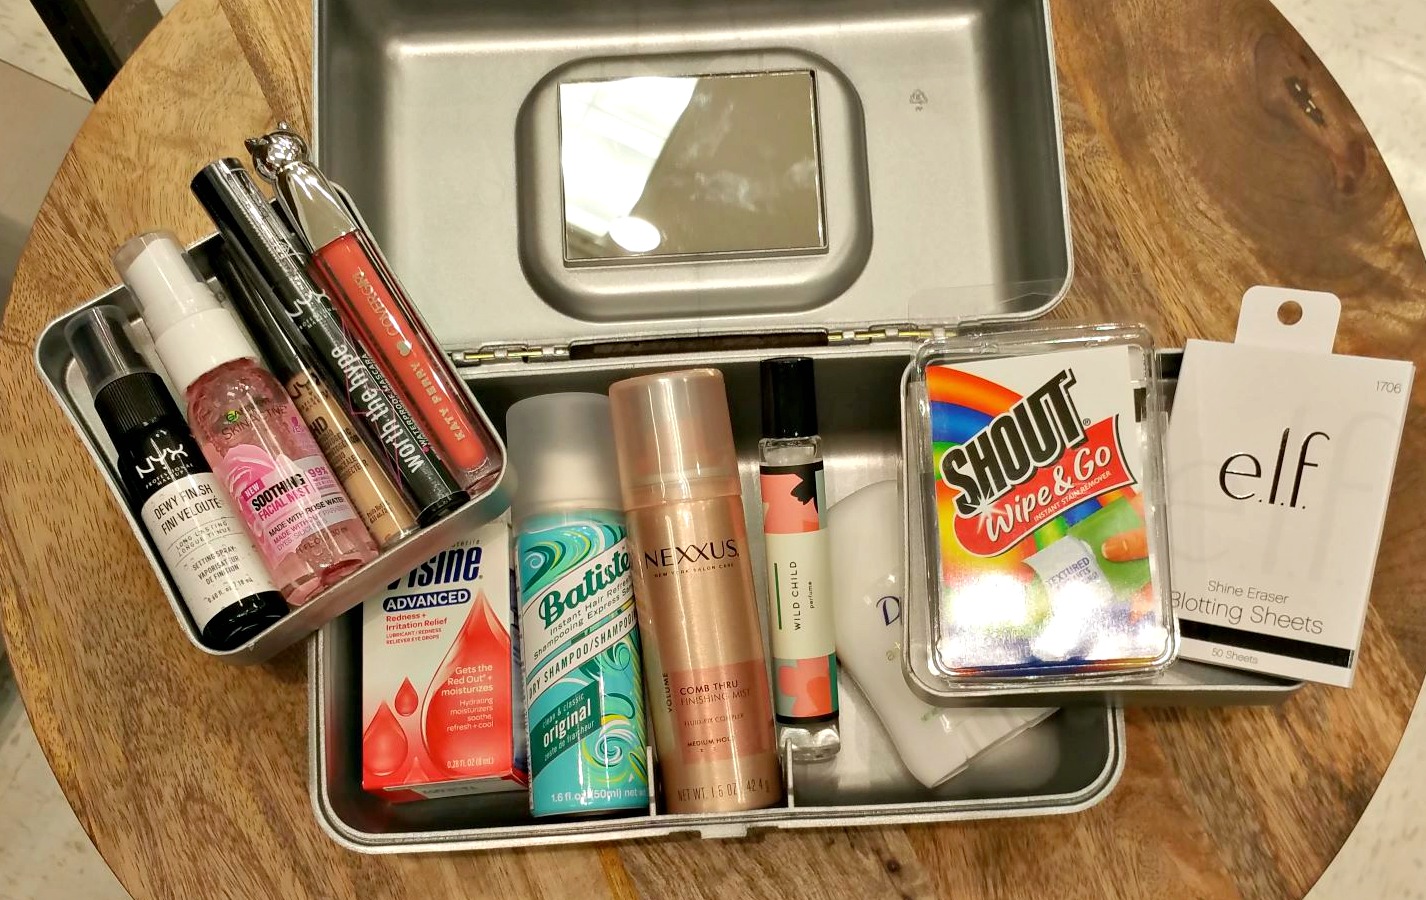 diy locker kits for middle or high school can be made from containers like Caboodle, shown here filled with items.